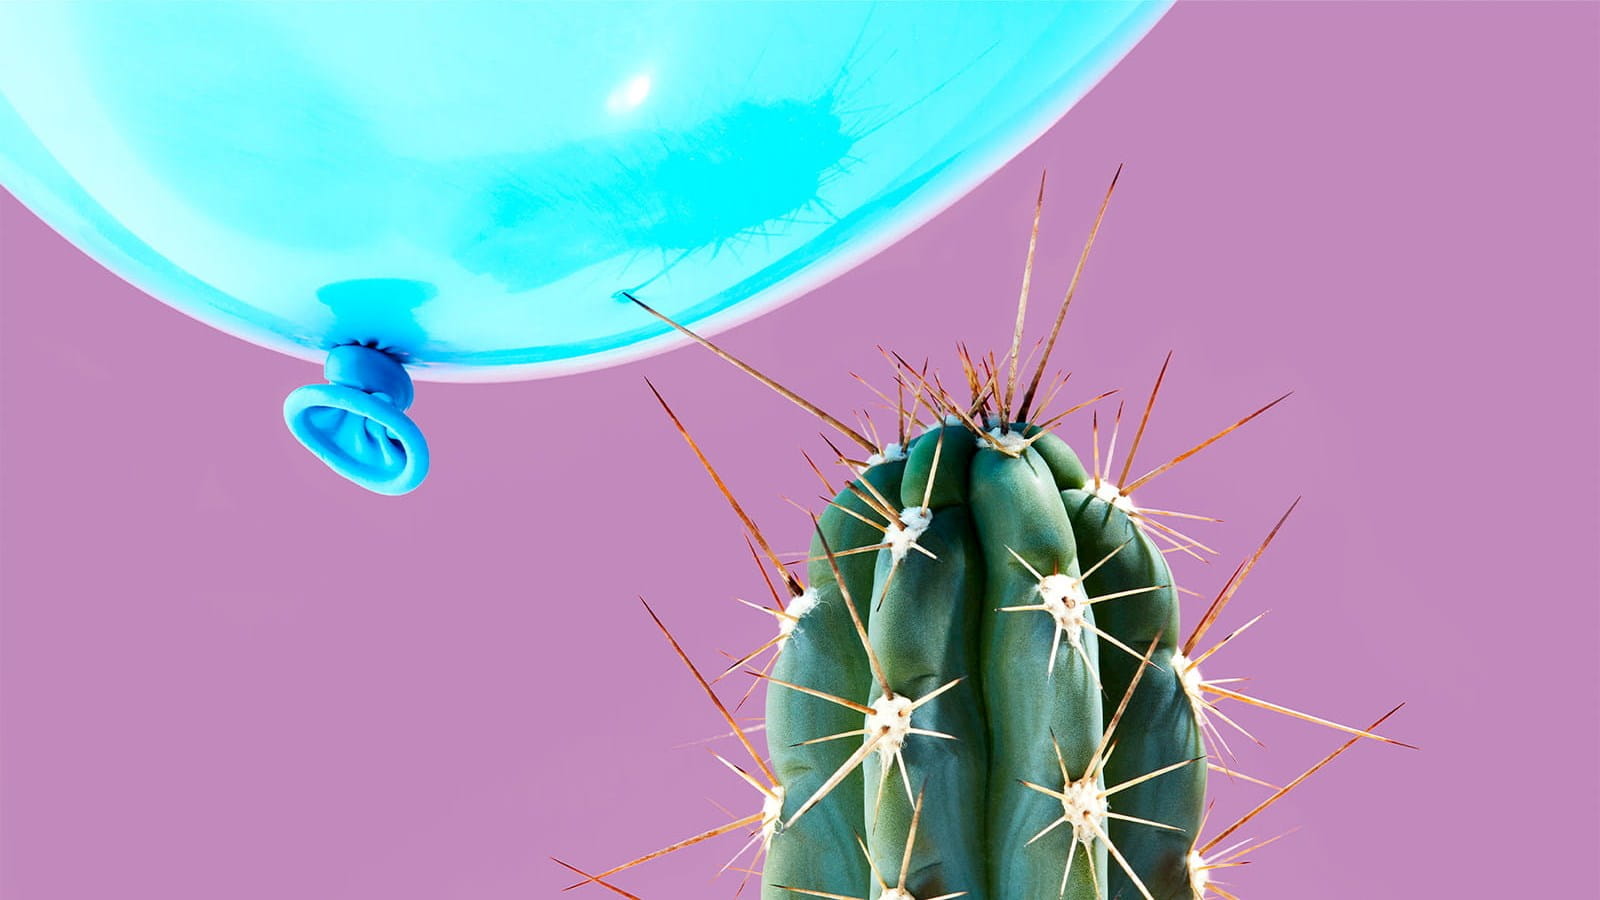 cactus needles piercing a bright blue balloon about to burst purple background